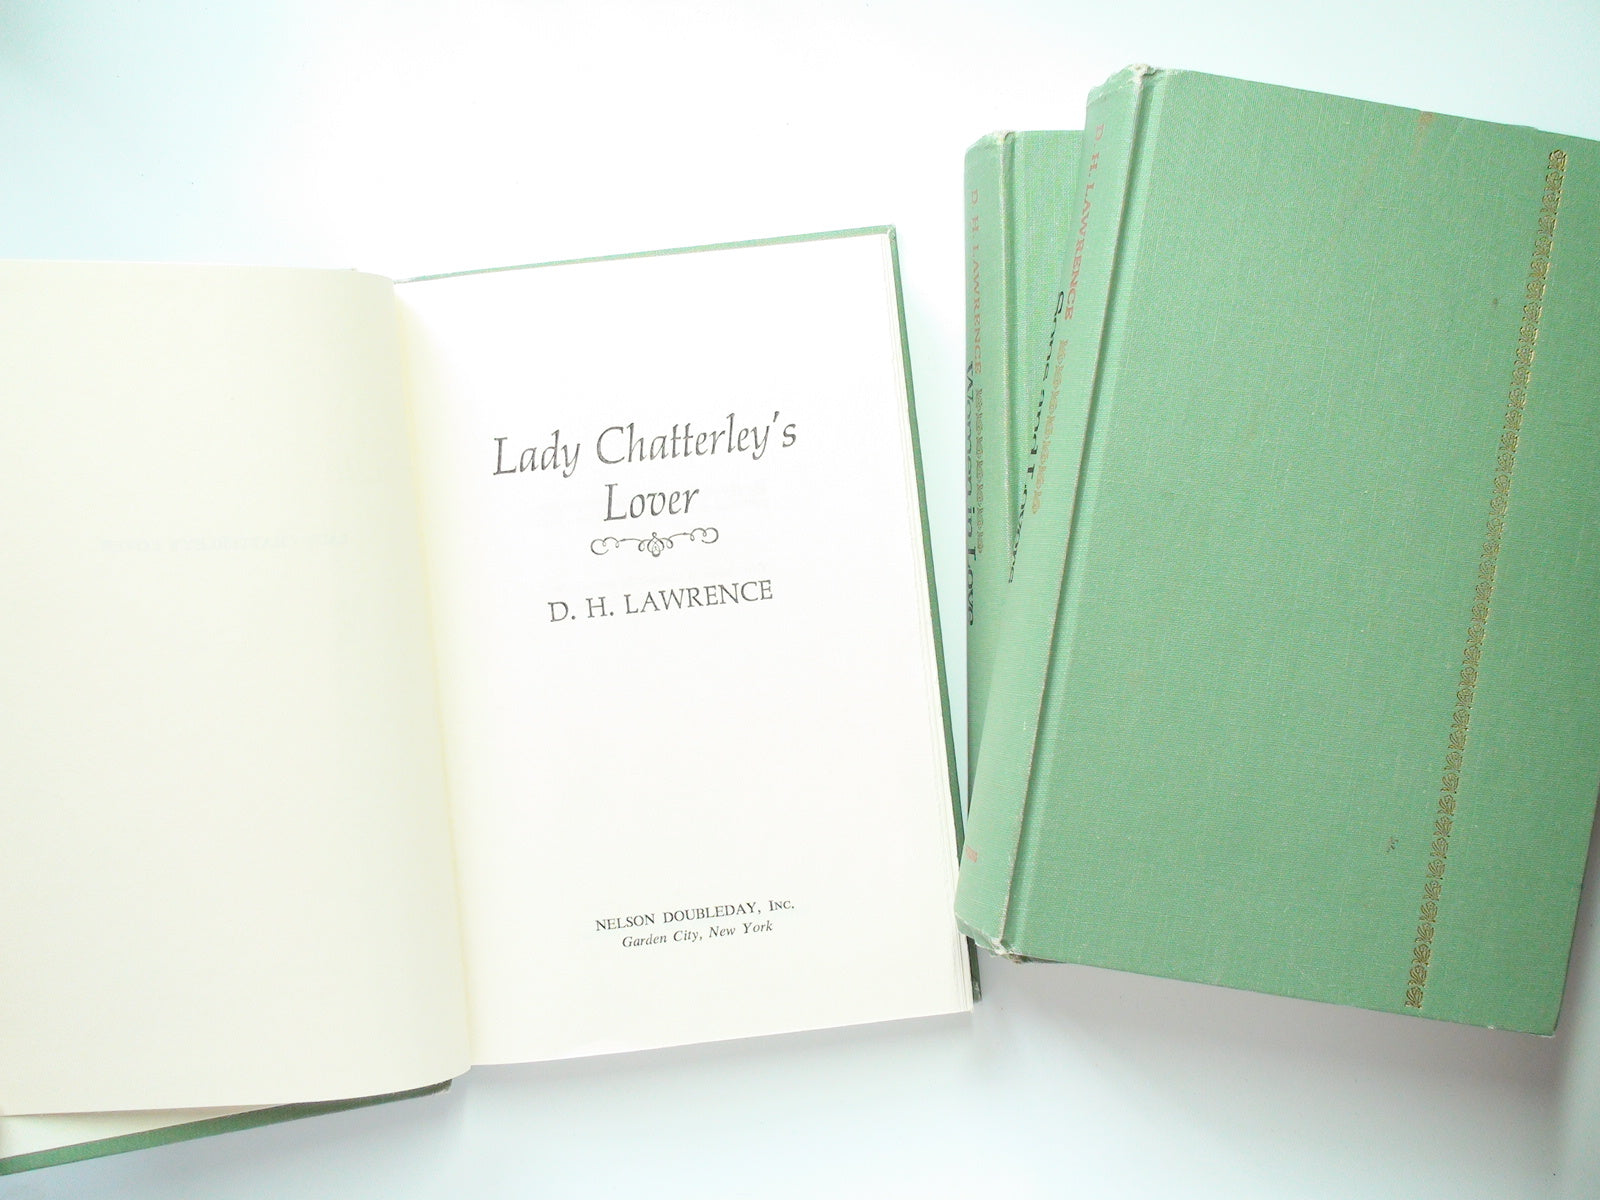 Lady Chatterley's Lover, Sons and Lovers, Women in Love, Erotica and Romance Novels by D. H. Lawrence